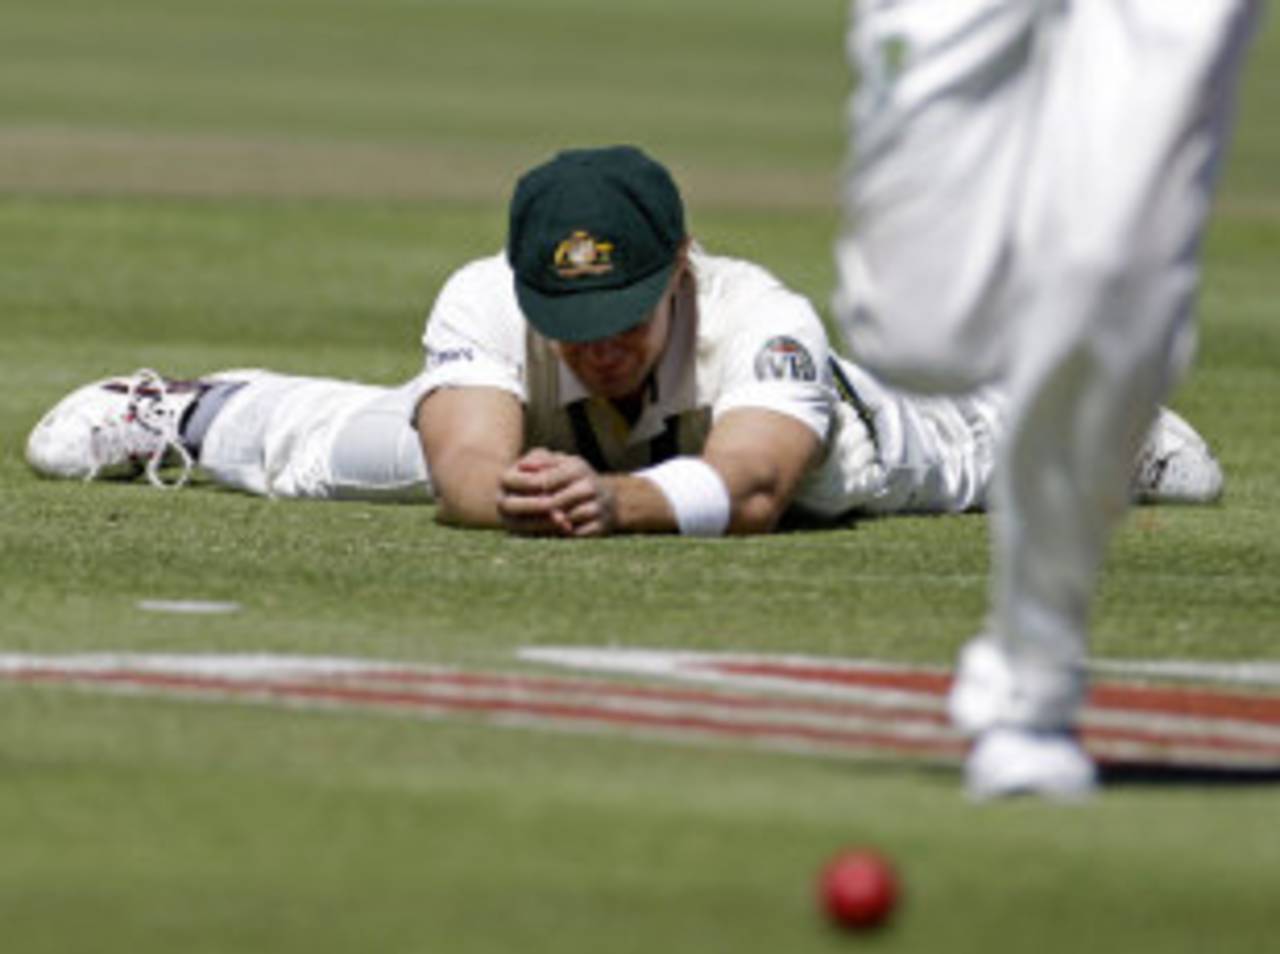 Shane Watson reacts after dropping Hashim Amla, South Africa v Australia, 1st Test, Cape Town, 3rd day, November 11, 2011